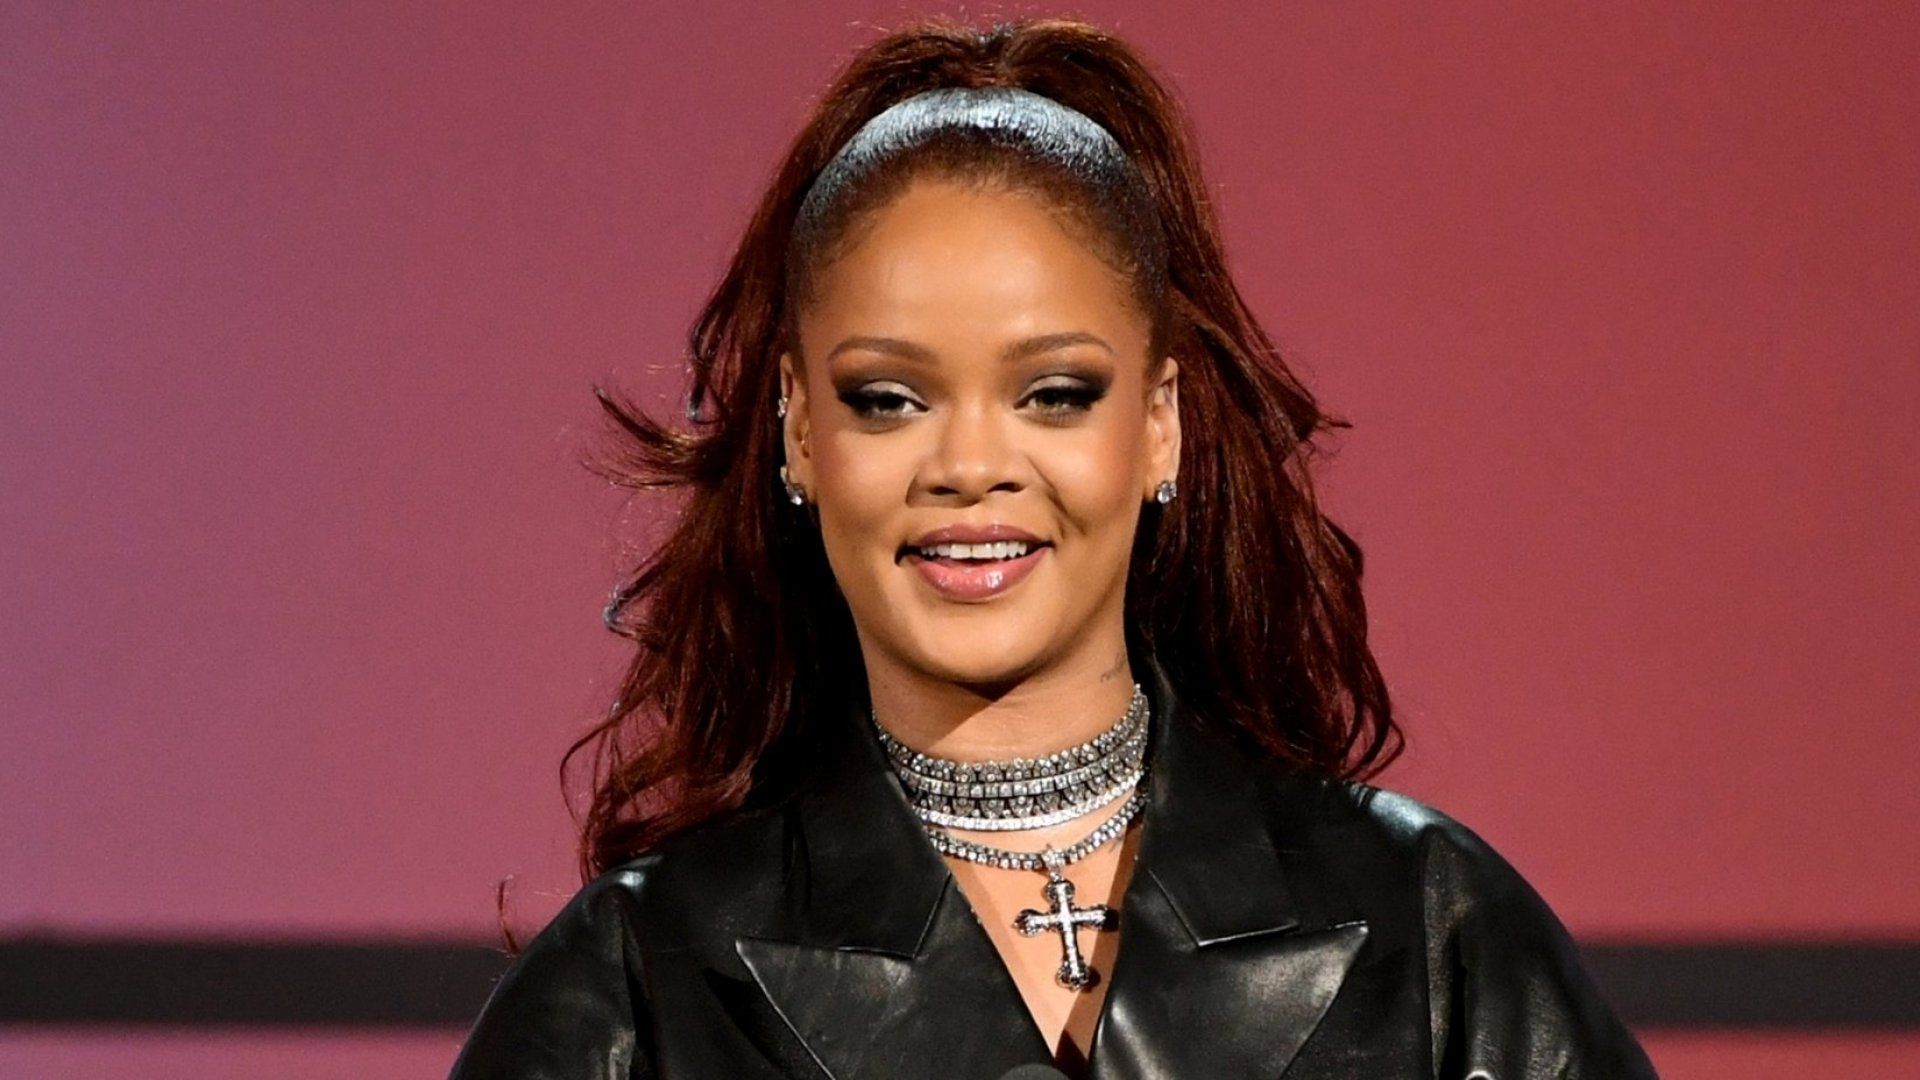 Winning Strategies That Fuel the Growth of Rihanna's $600 Million Entrepreneurial Empire